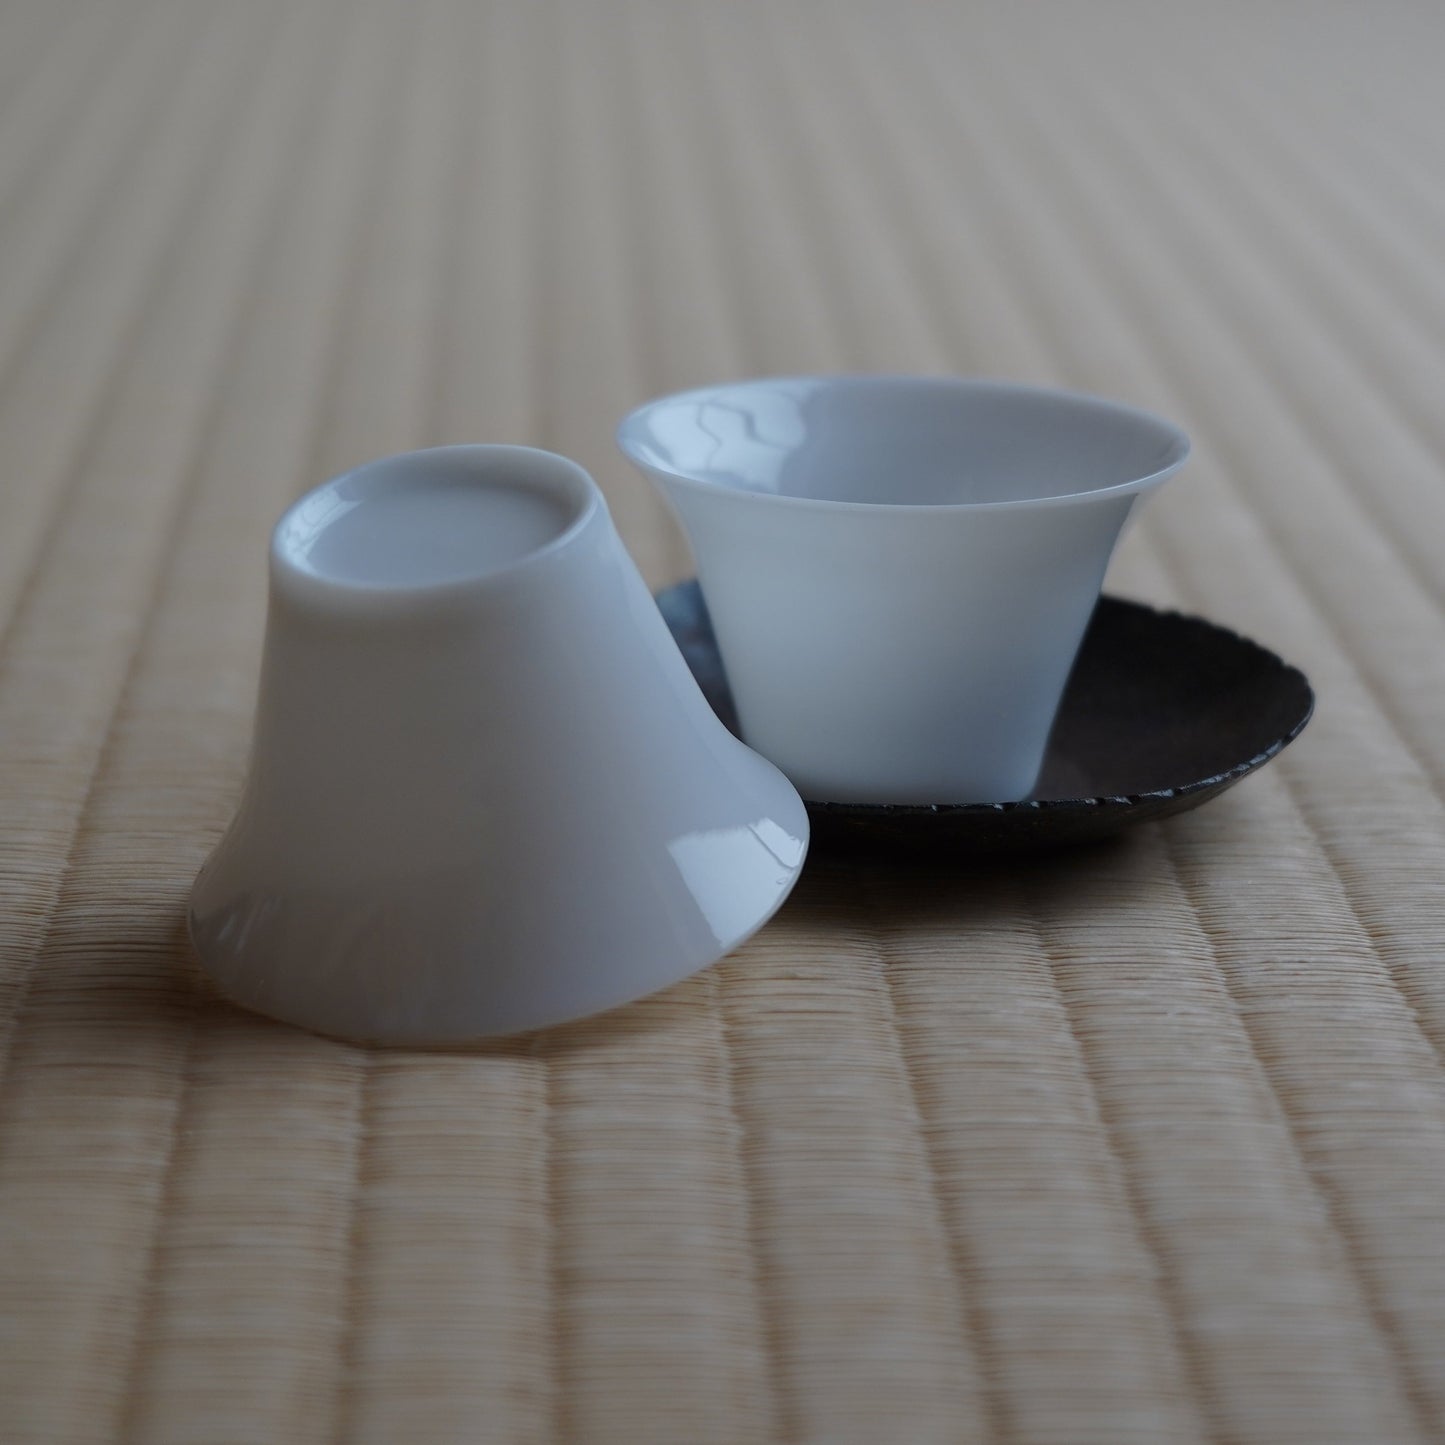 White Porcelain Thin-bodied Conical teacup